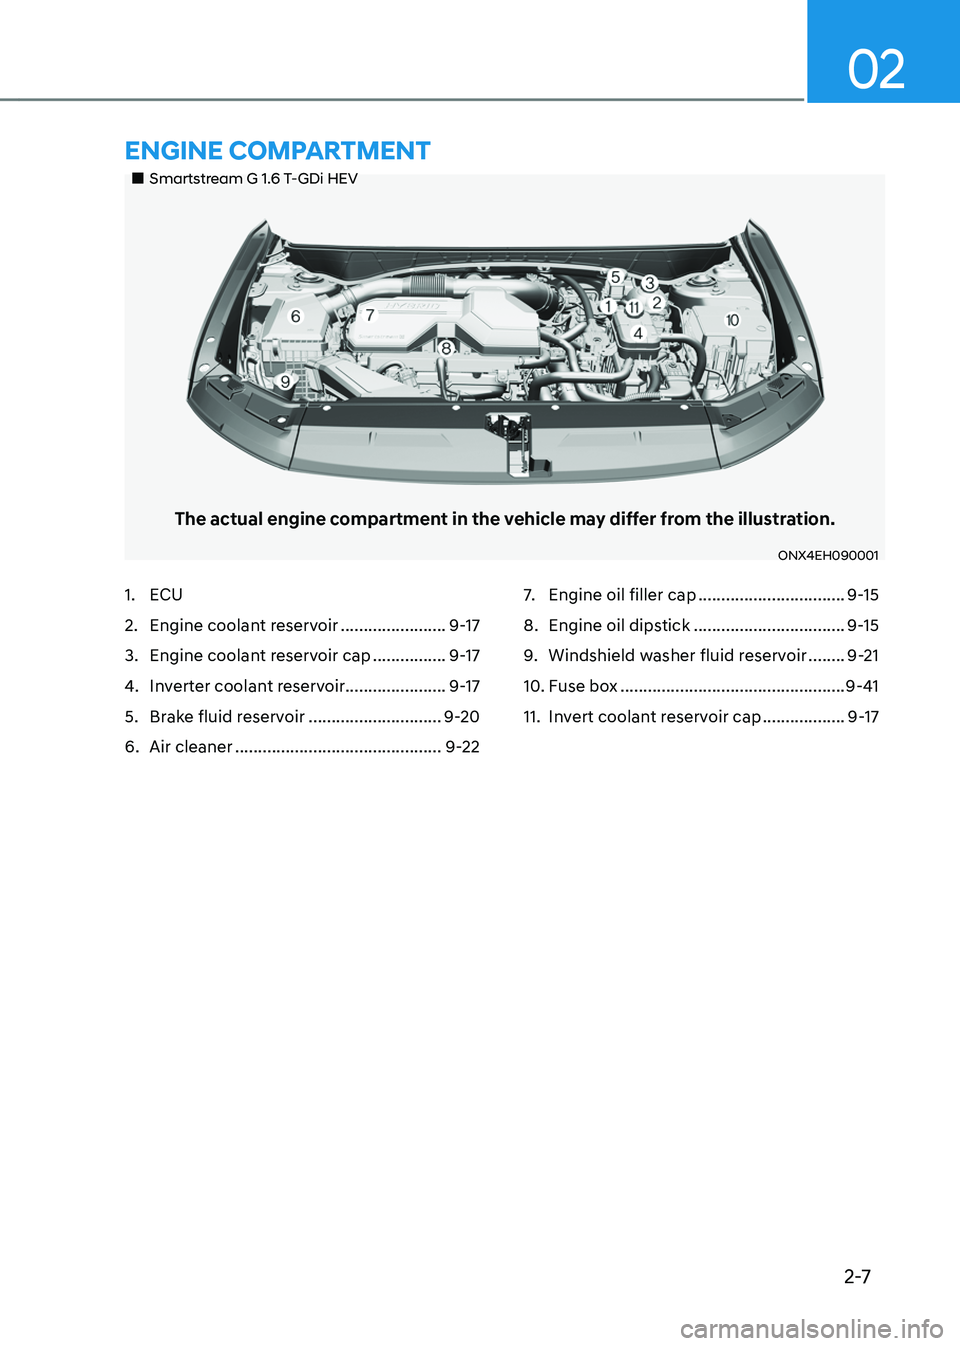 HYUNDAI TUCSON HYBRID 2021  Owners Manual 2-7
02
„„Smartstream G 1.6 T-GDi HEV
The actual engine compartment in the vehicle may differ from the illustration.
ONX4EH090001
1. ECU
2. Engine coolant reservoir .......................9-1